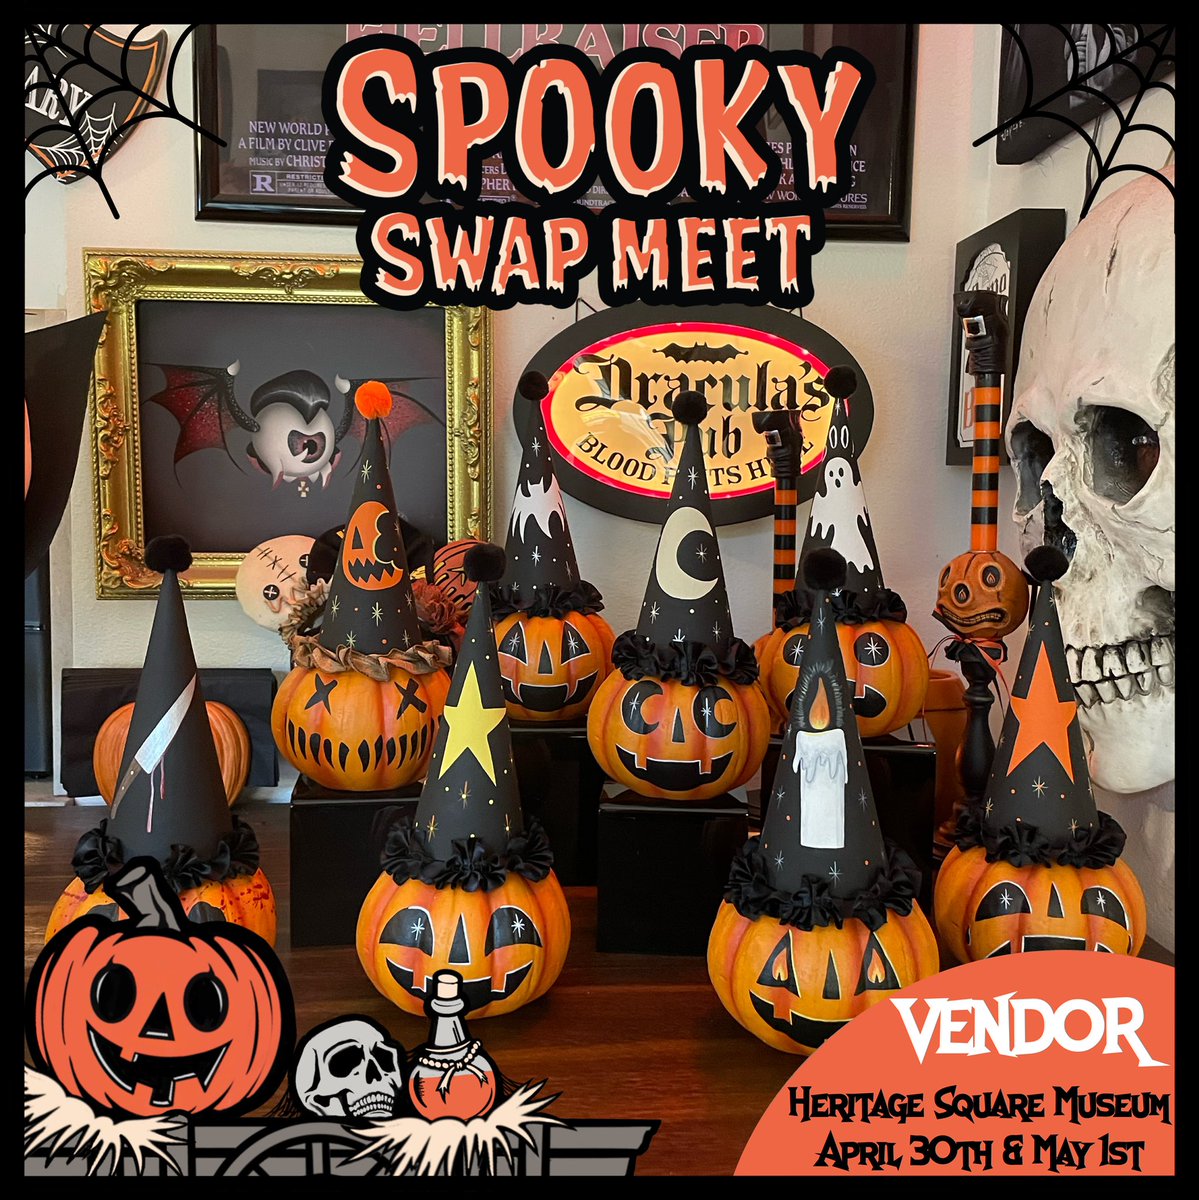 A couple of the many fantastic vendors at #spookyswapmeet and their wares that will be available April 20 and May 1 #abbybelle #luckyhellcat #danisspookytreats #velvetapparition